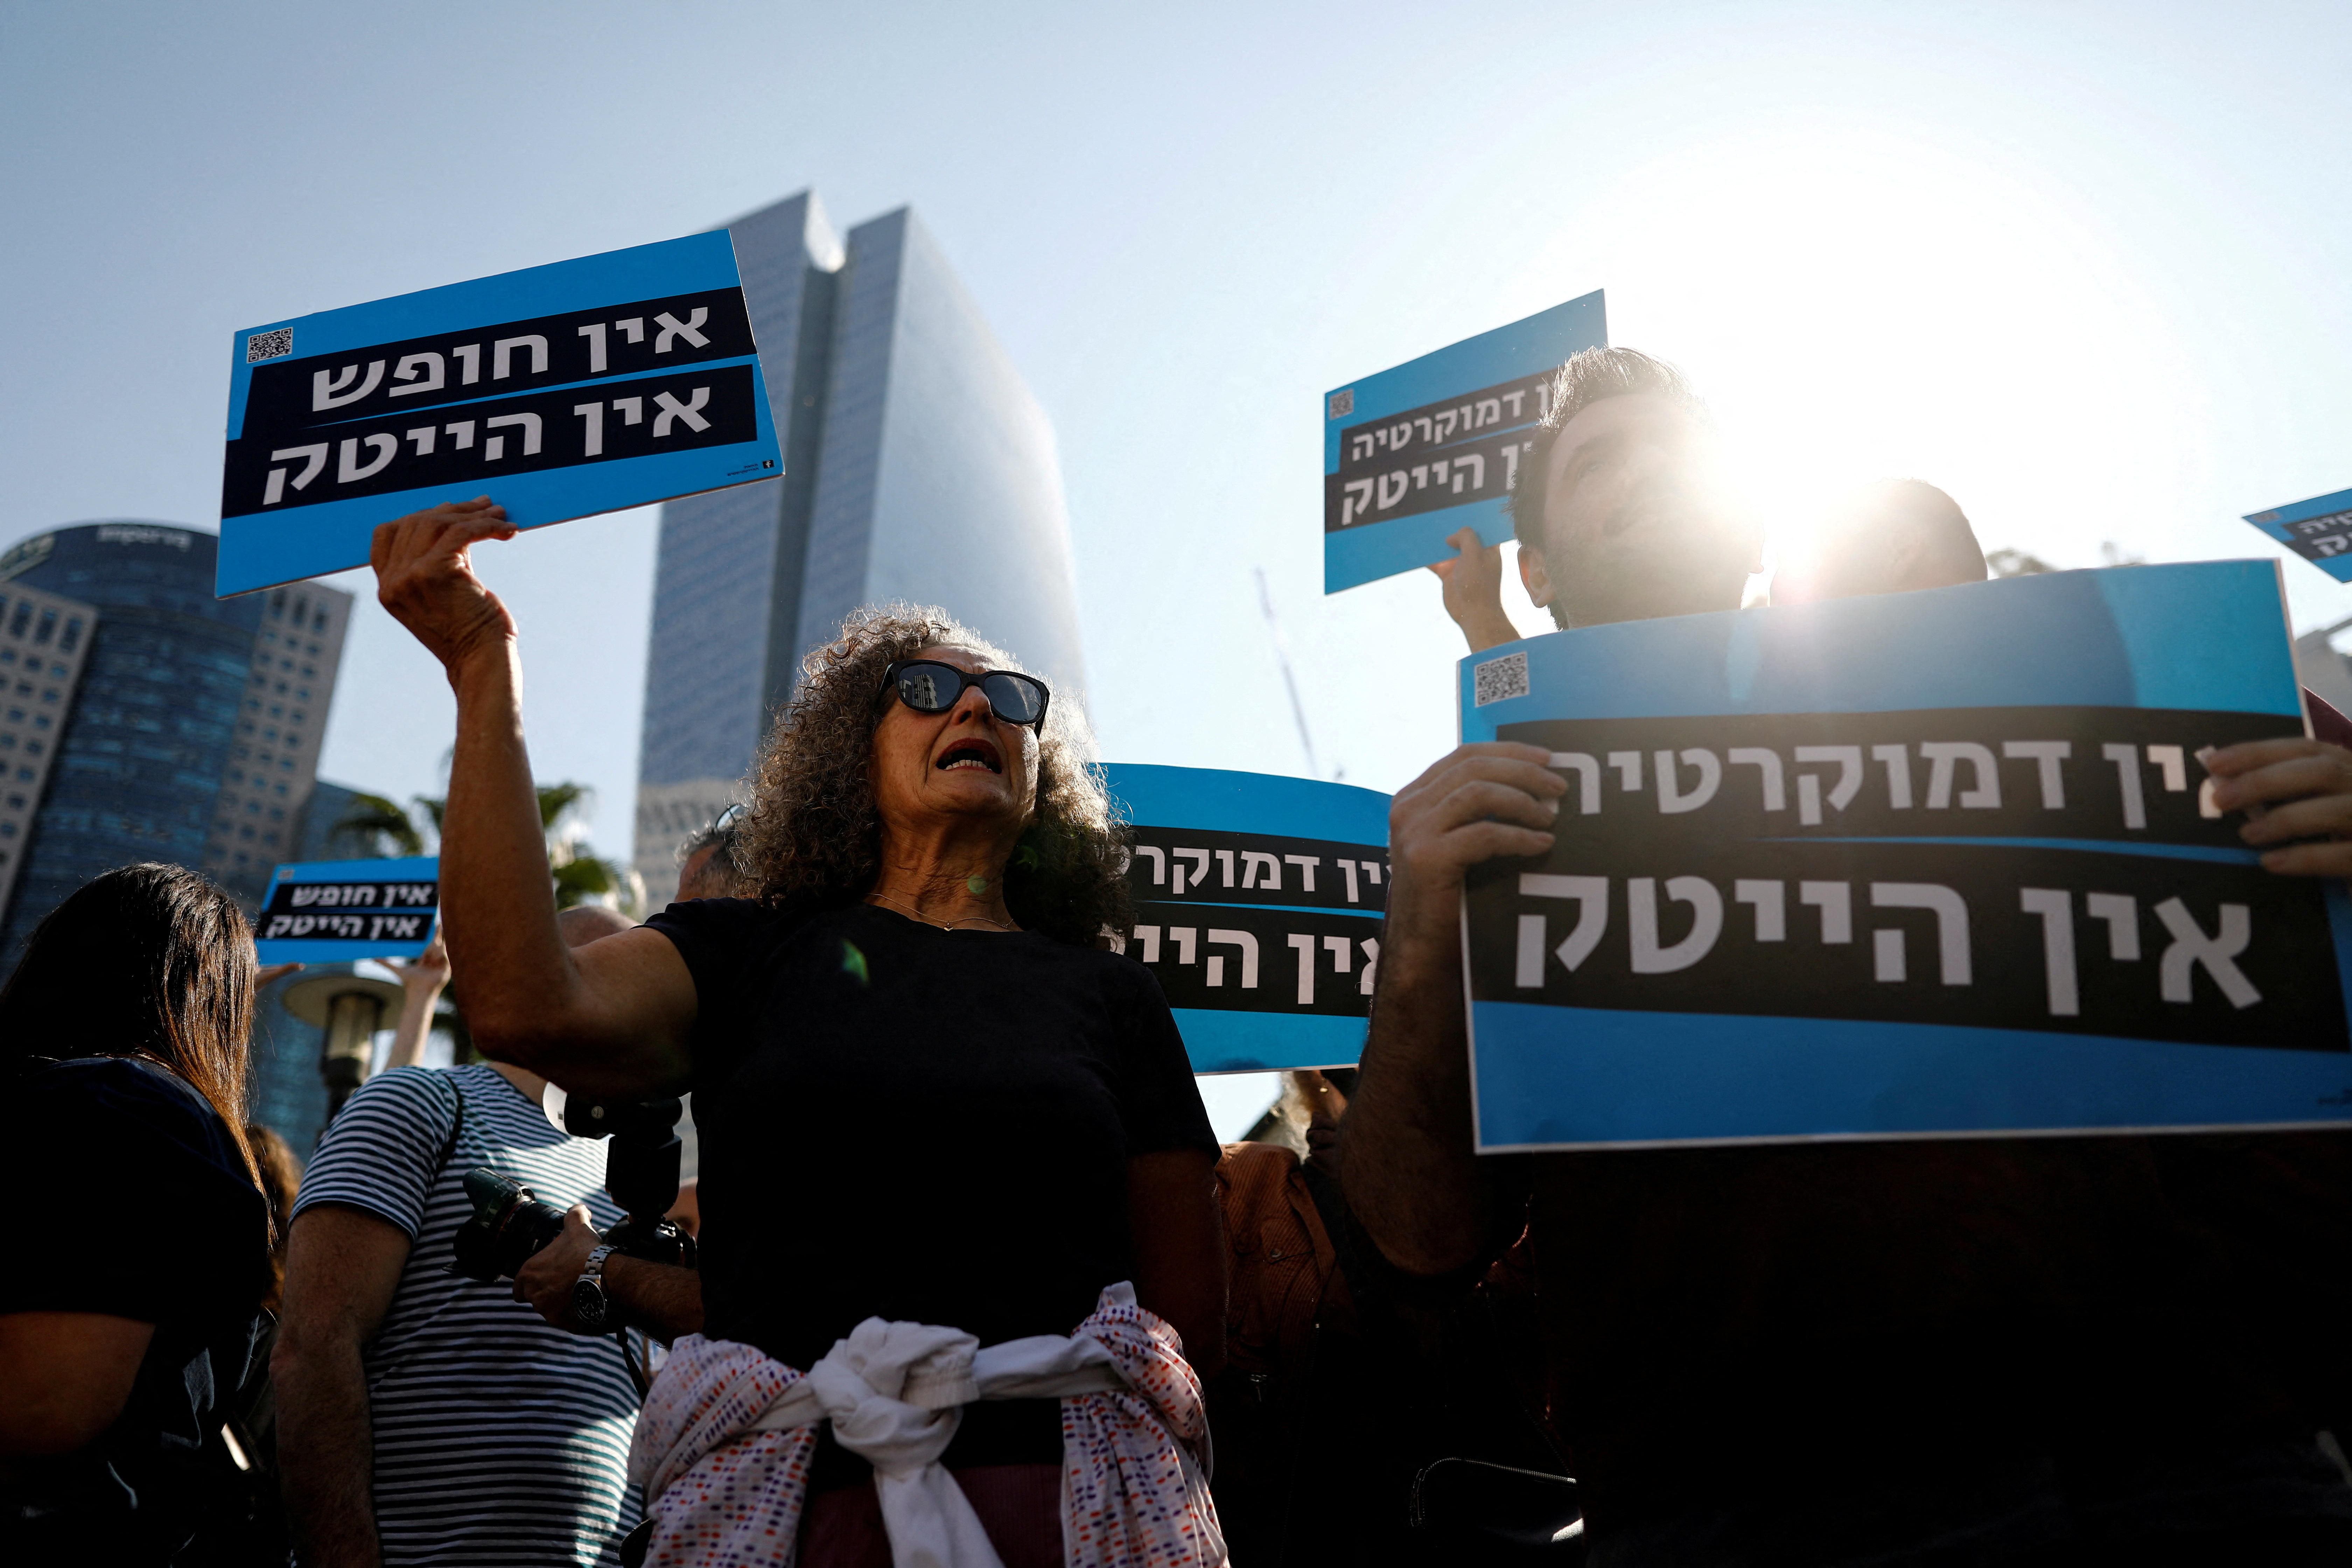 Israel's hi-tech sector protest judicial reforms of right-wing government